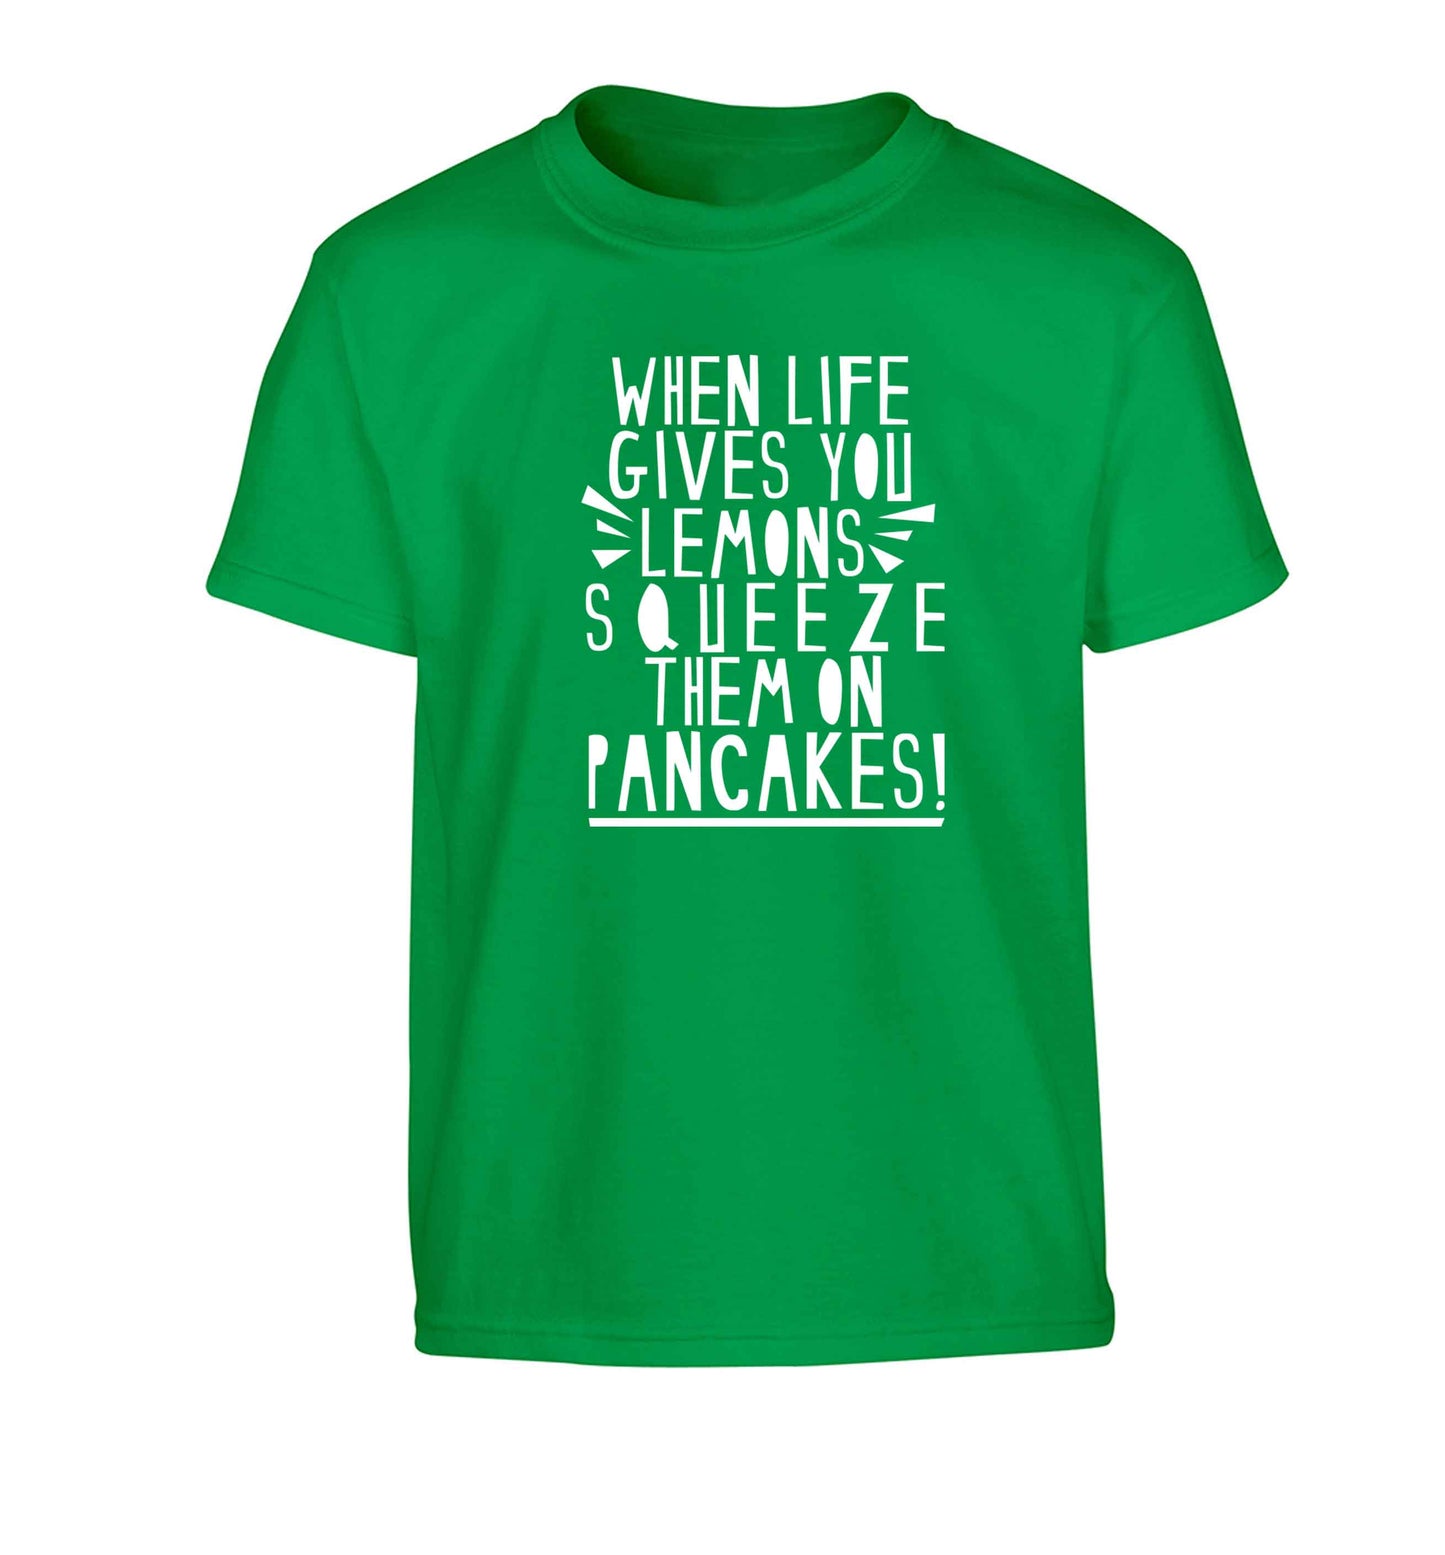 When life gives you lemons squeeze them on pancakes! Children's green Tshirt 12-13 Years